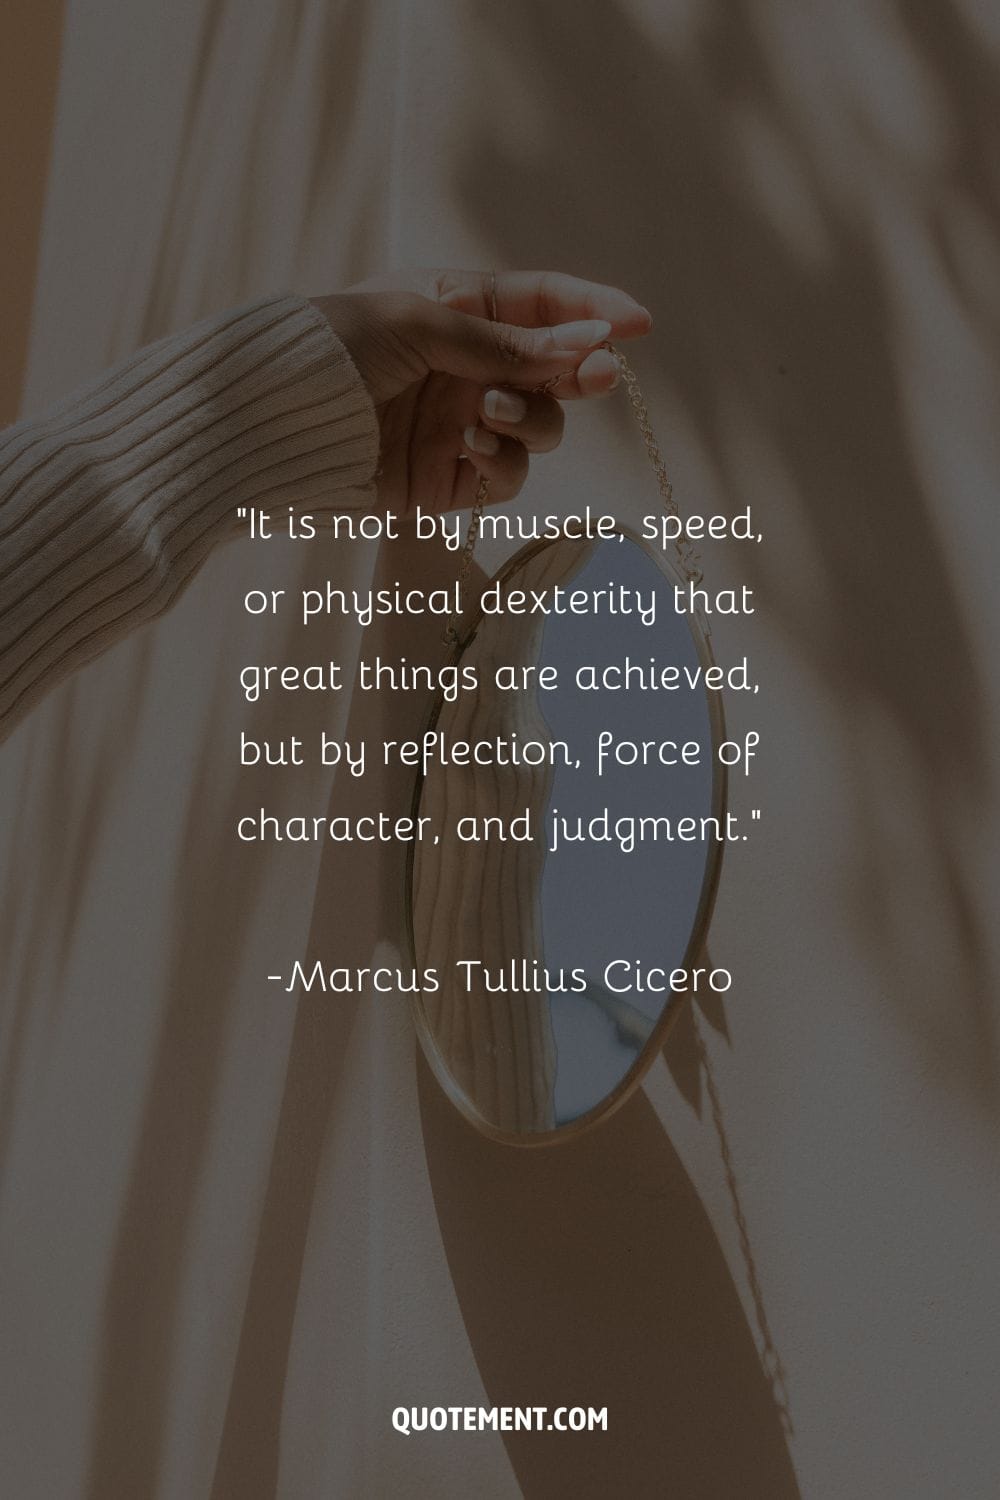 It is not by muscle, speed, or physical dexterity that great things are achieved, but by reflection, force of character, and judgment. – Marcus Tullius Cicero